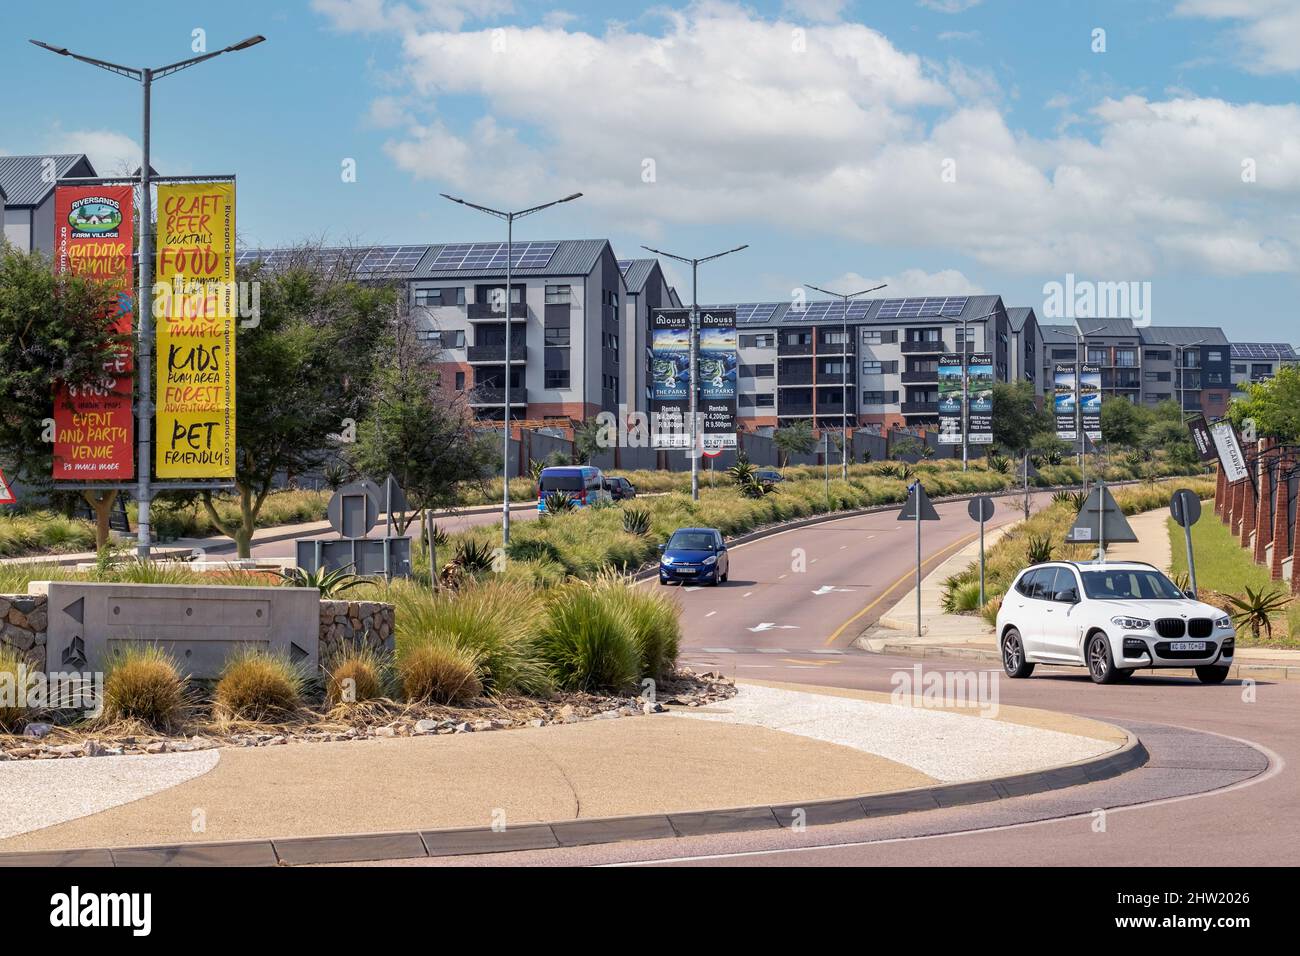 Johannesburg, South Africa, 24th February - 2022: View up road towards large apartment development with turning circle in foreground. Stock Photo